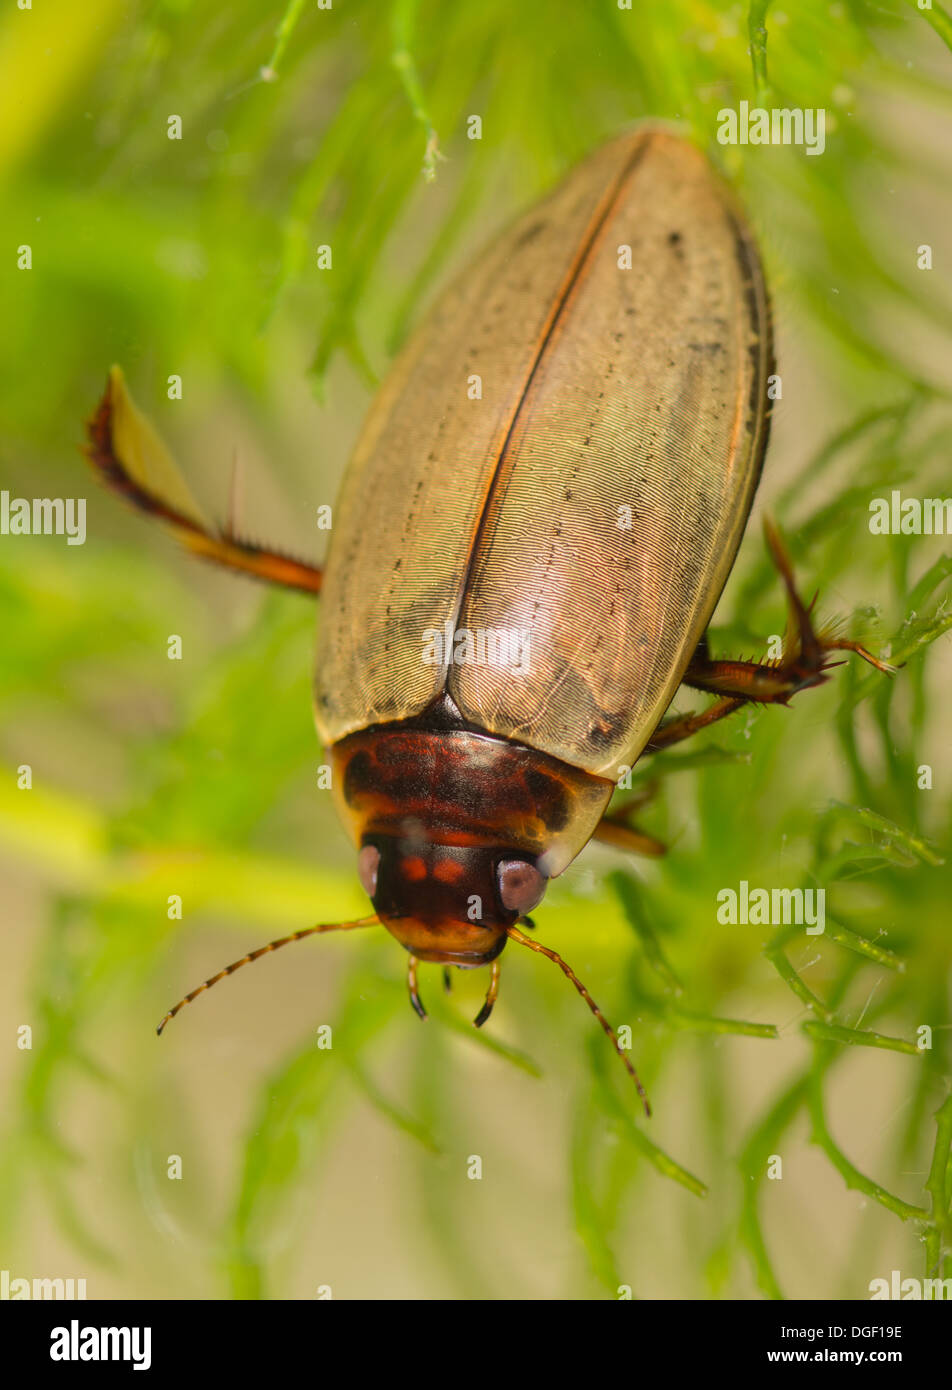 A Colymbetes fuscus diving beetle. Photo taken in an aquarium set up and creature released unharmed afterwards Stock Photo